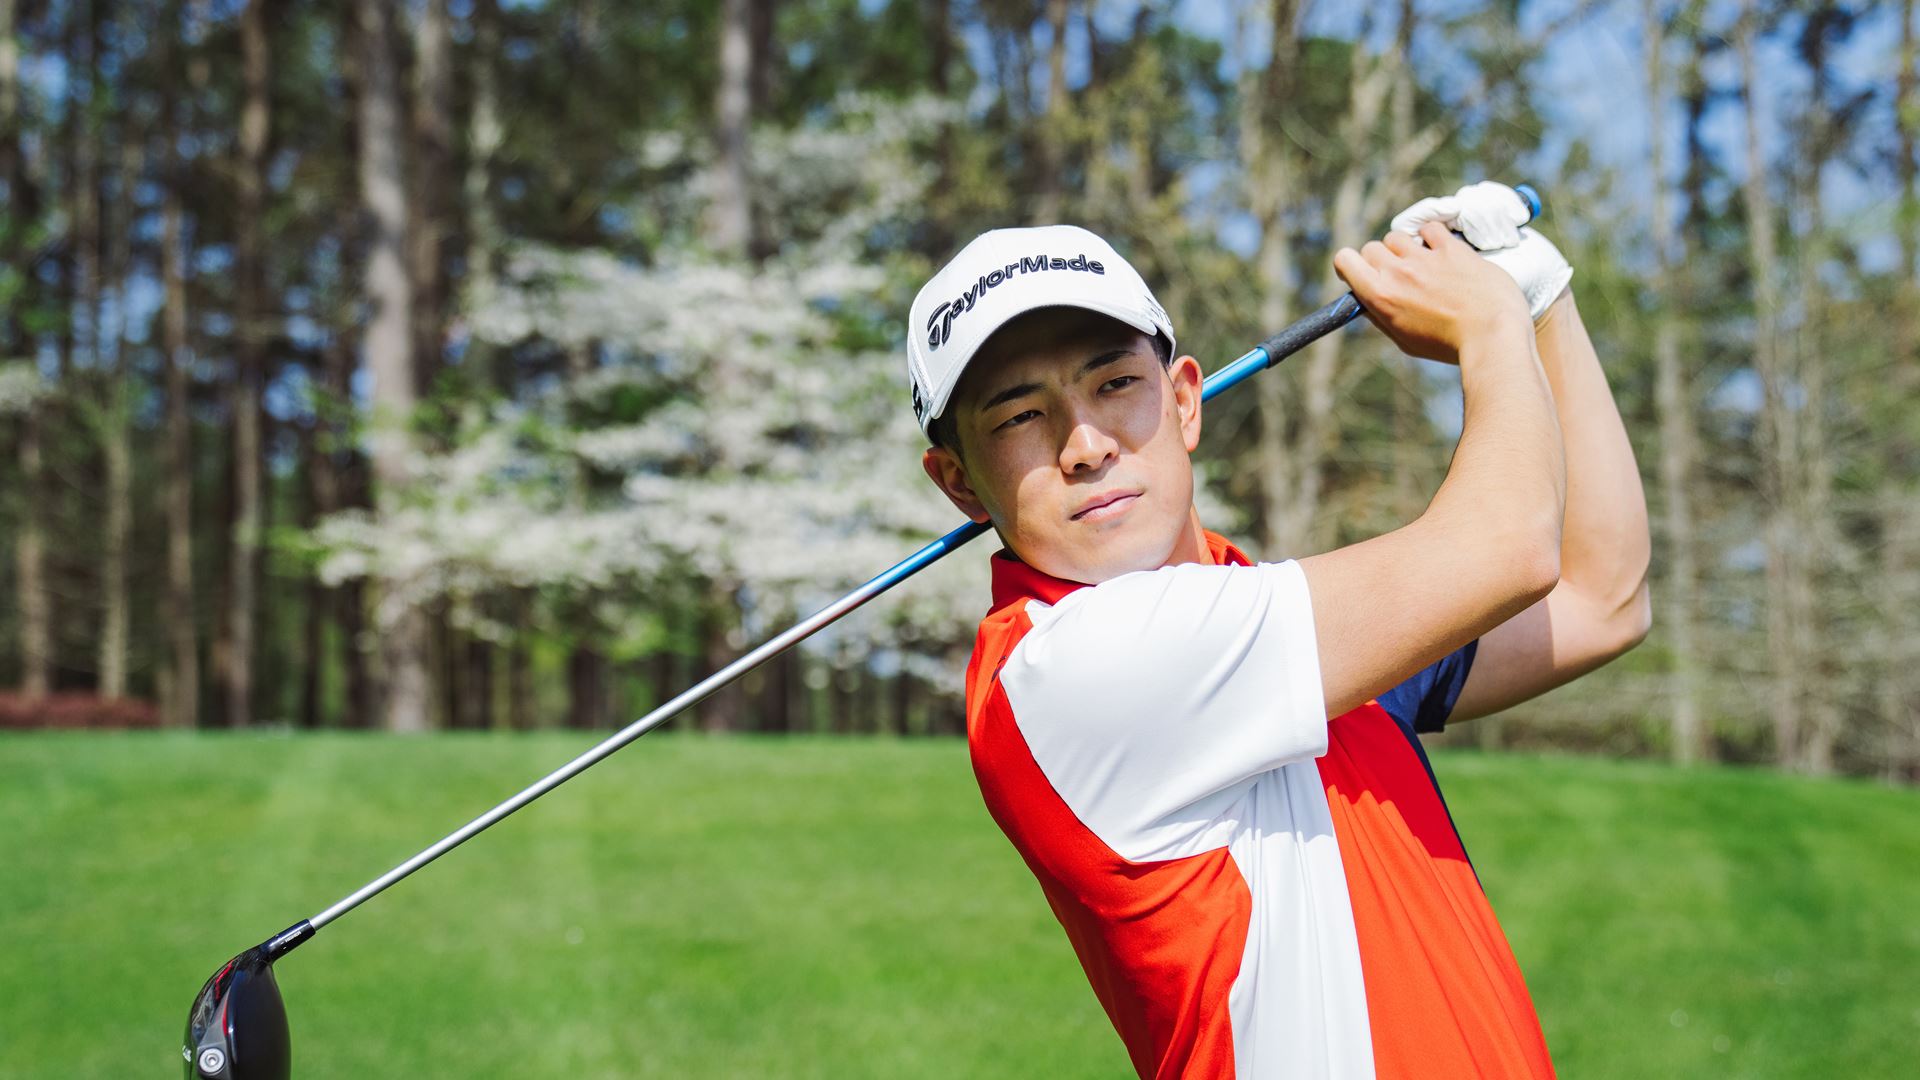 No. 1 Ranked Men's Amateur In The World Keita Nakajima Signs Agreement with TaylorMade Golf Company; Set to Play Full Bag of TaylorMade Equipment and Wear TaylorMade Apparel